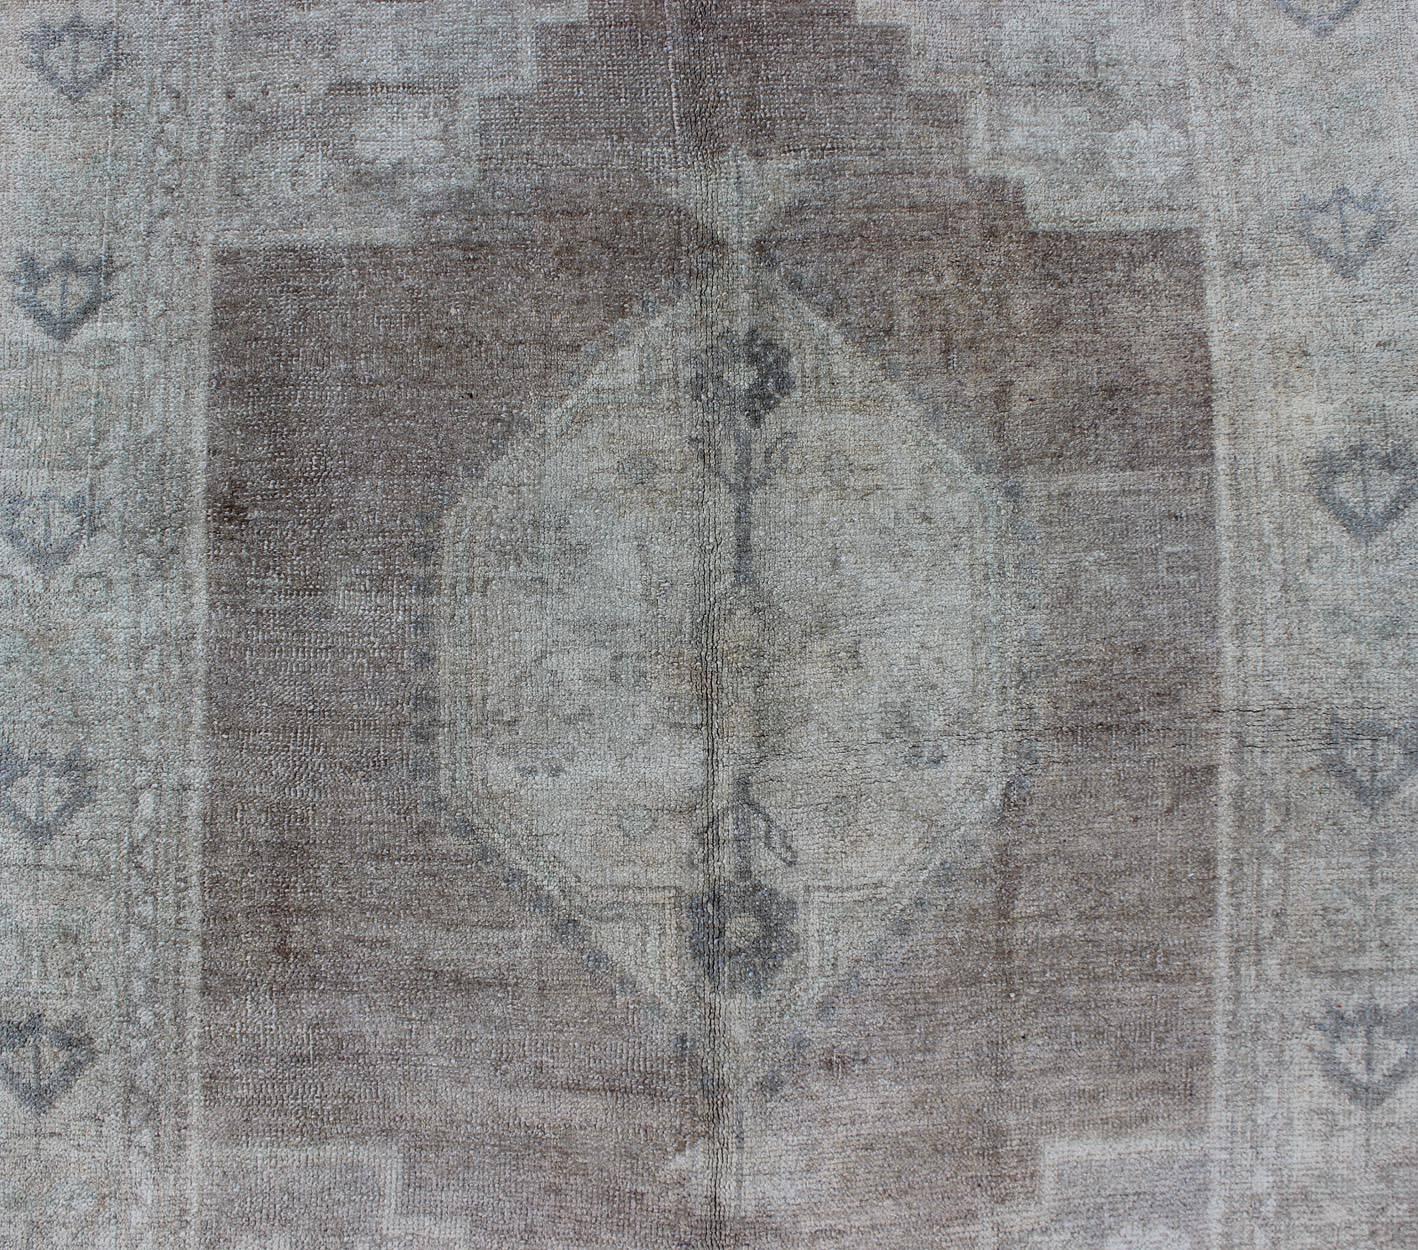 Wool Vintage Oushak Rug rug with Mocha Color and Pale Neutral Tones